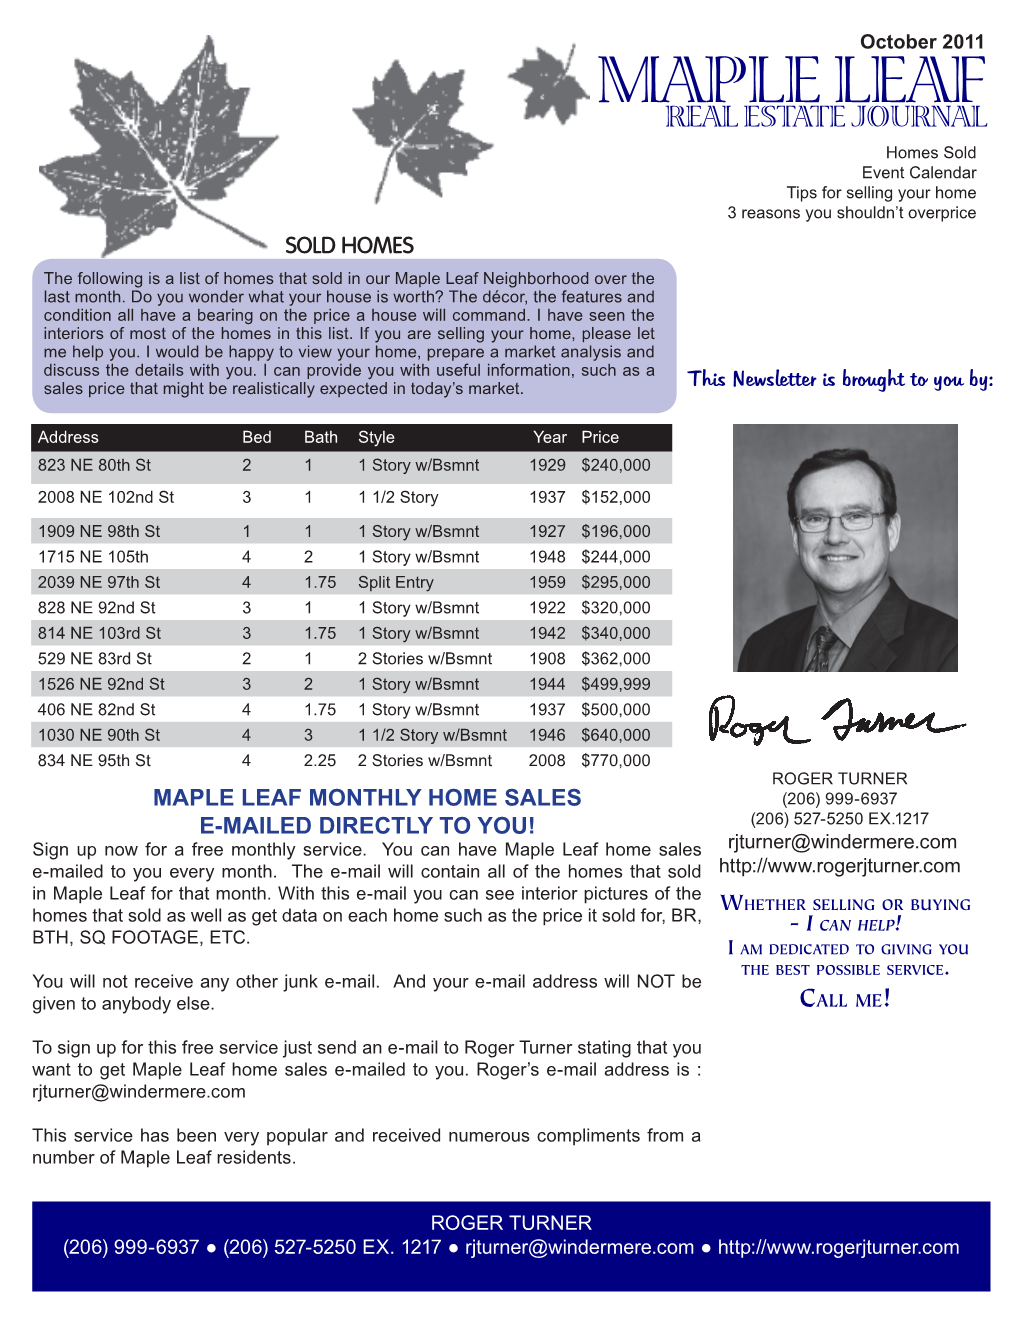 Maple Leaf Monthly Home Sales E-Mailed Directly To